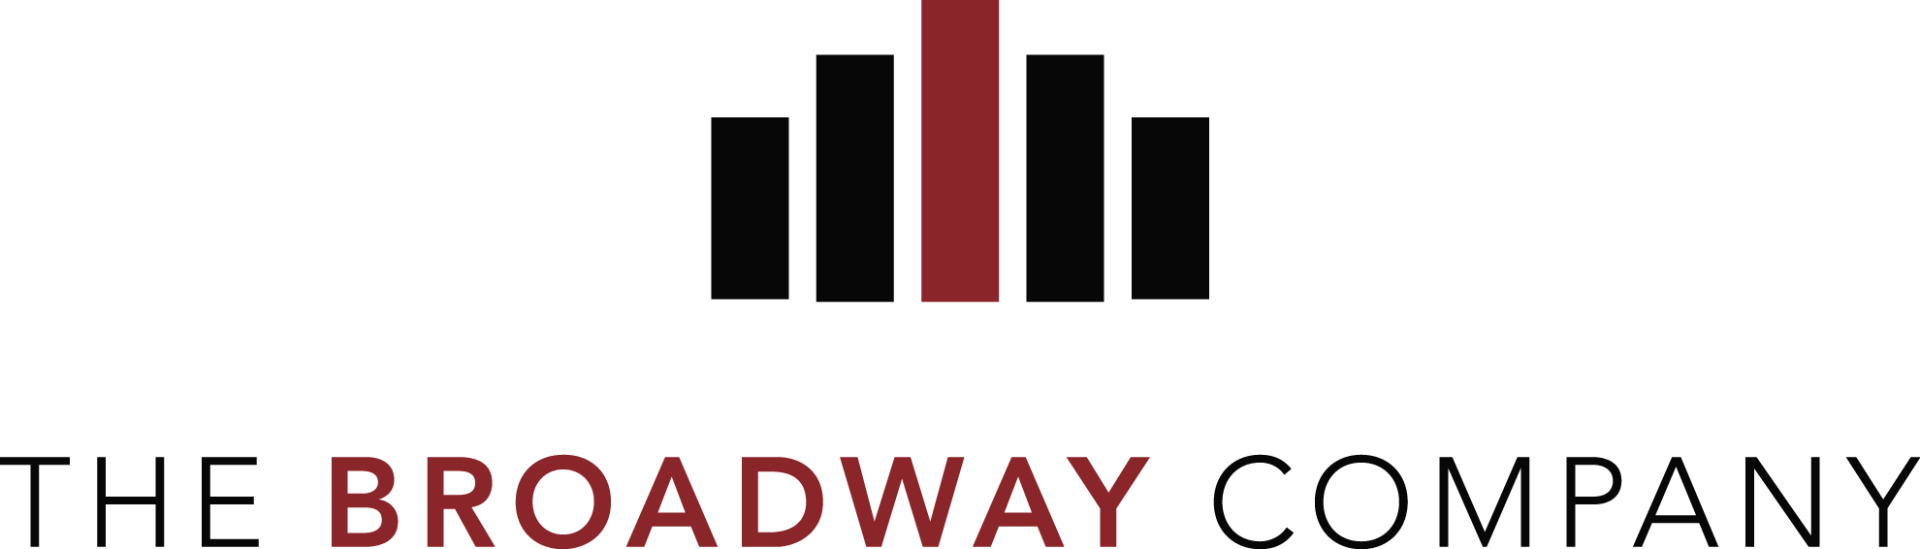 The Broadway Company Logo - Click to return to the homepage